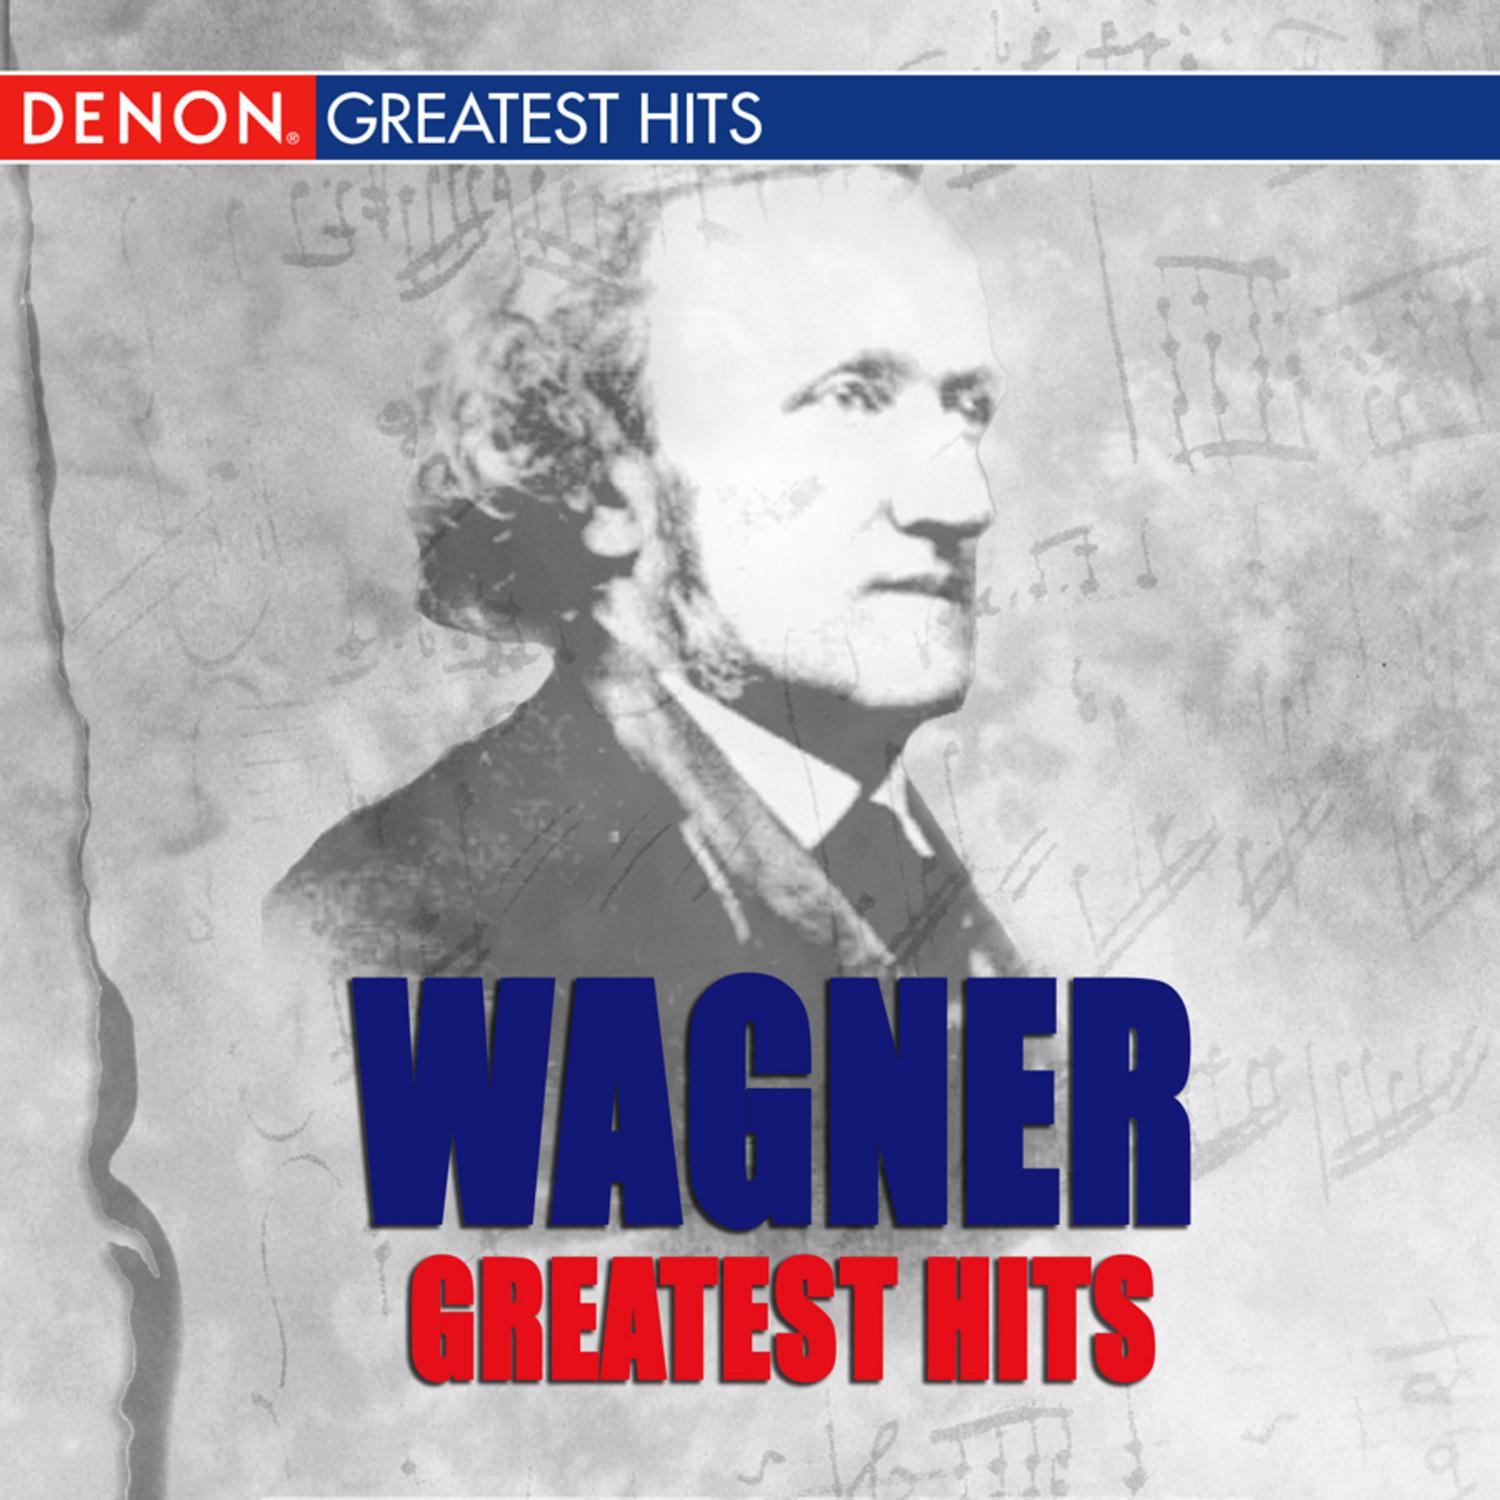 Wagner's Greatest Hits